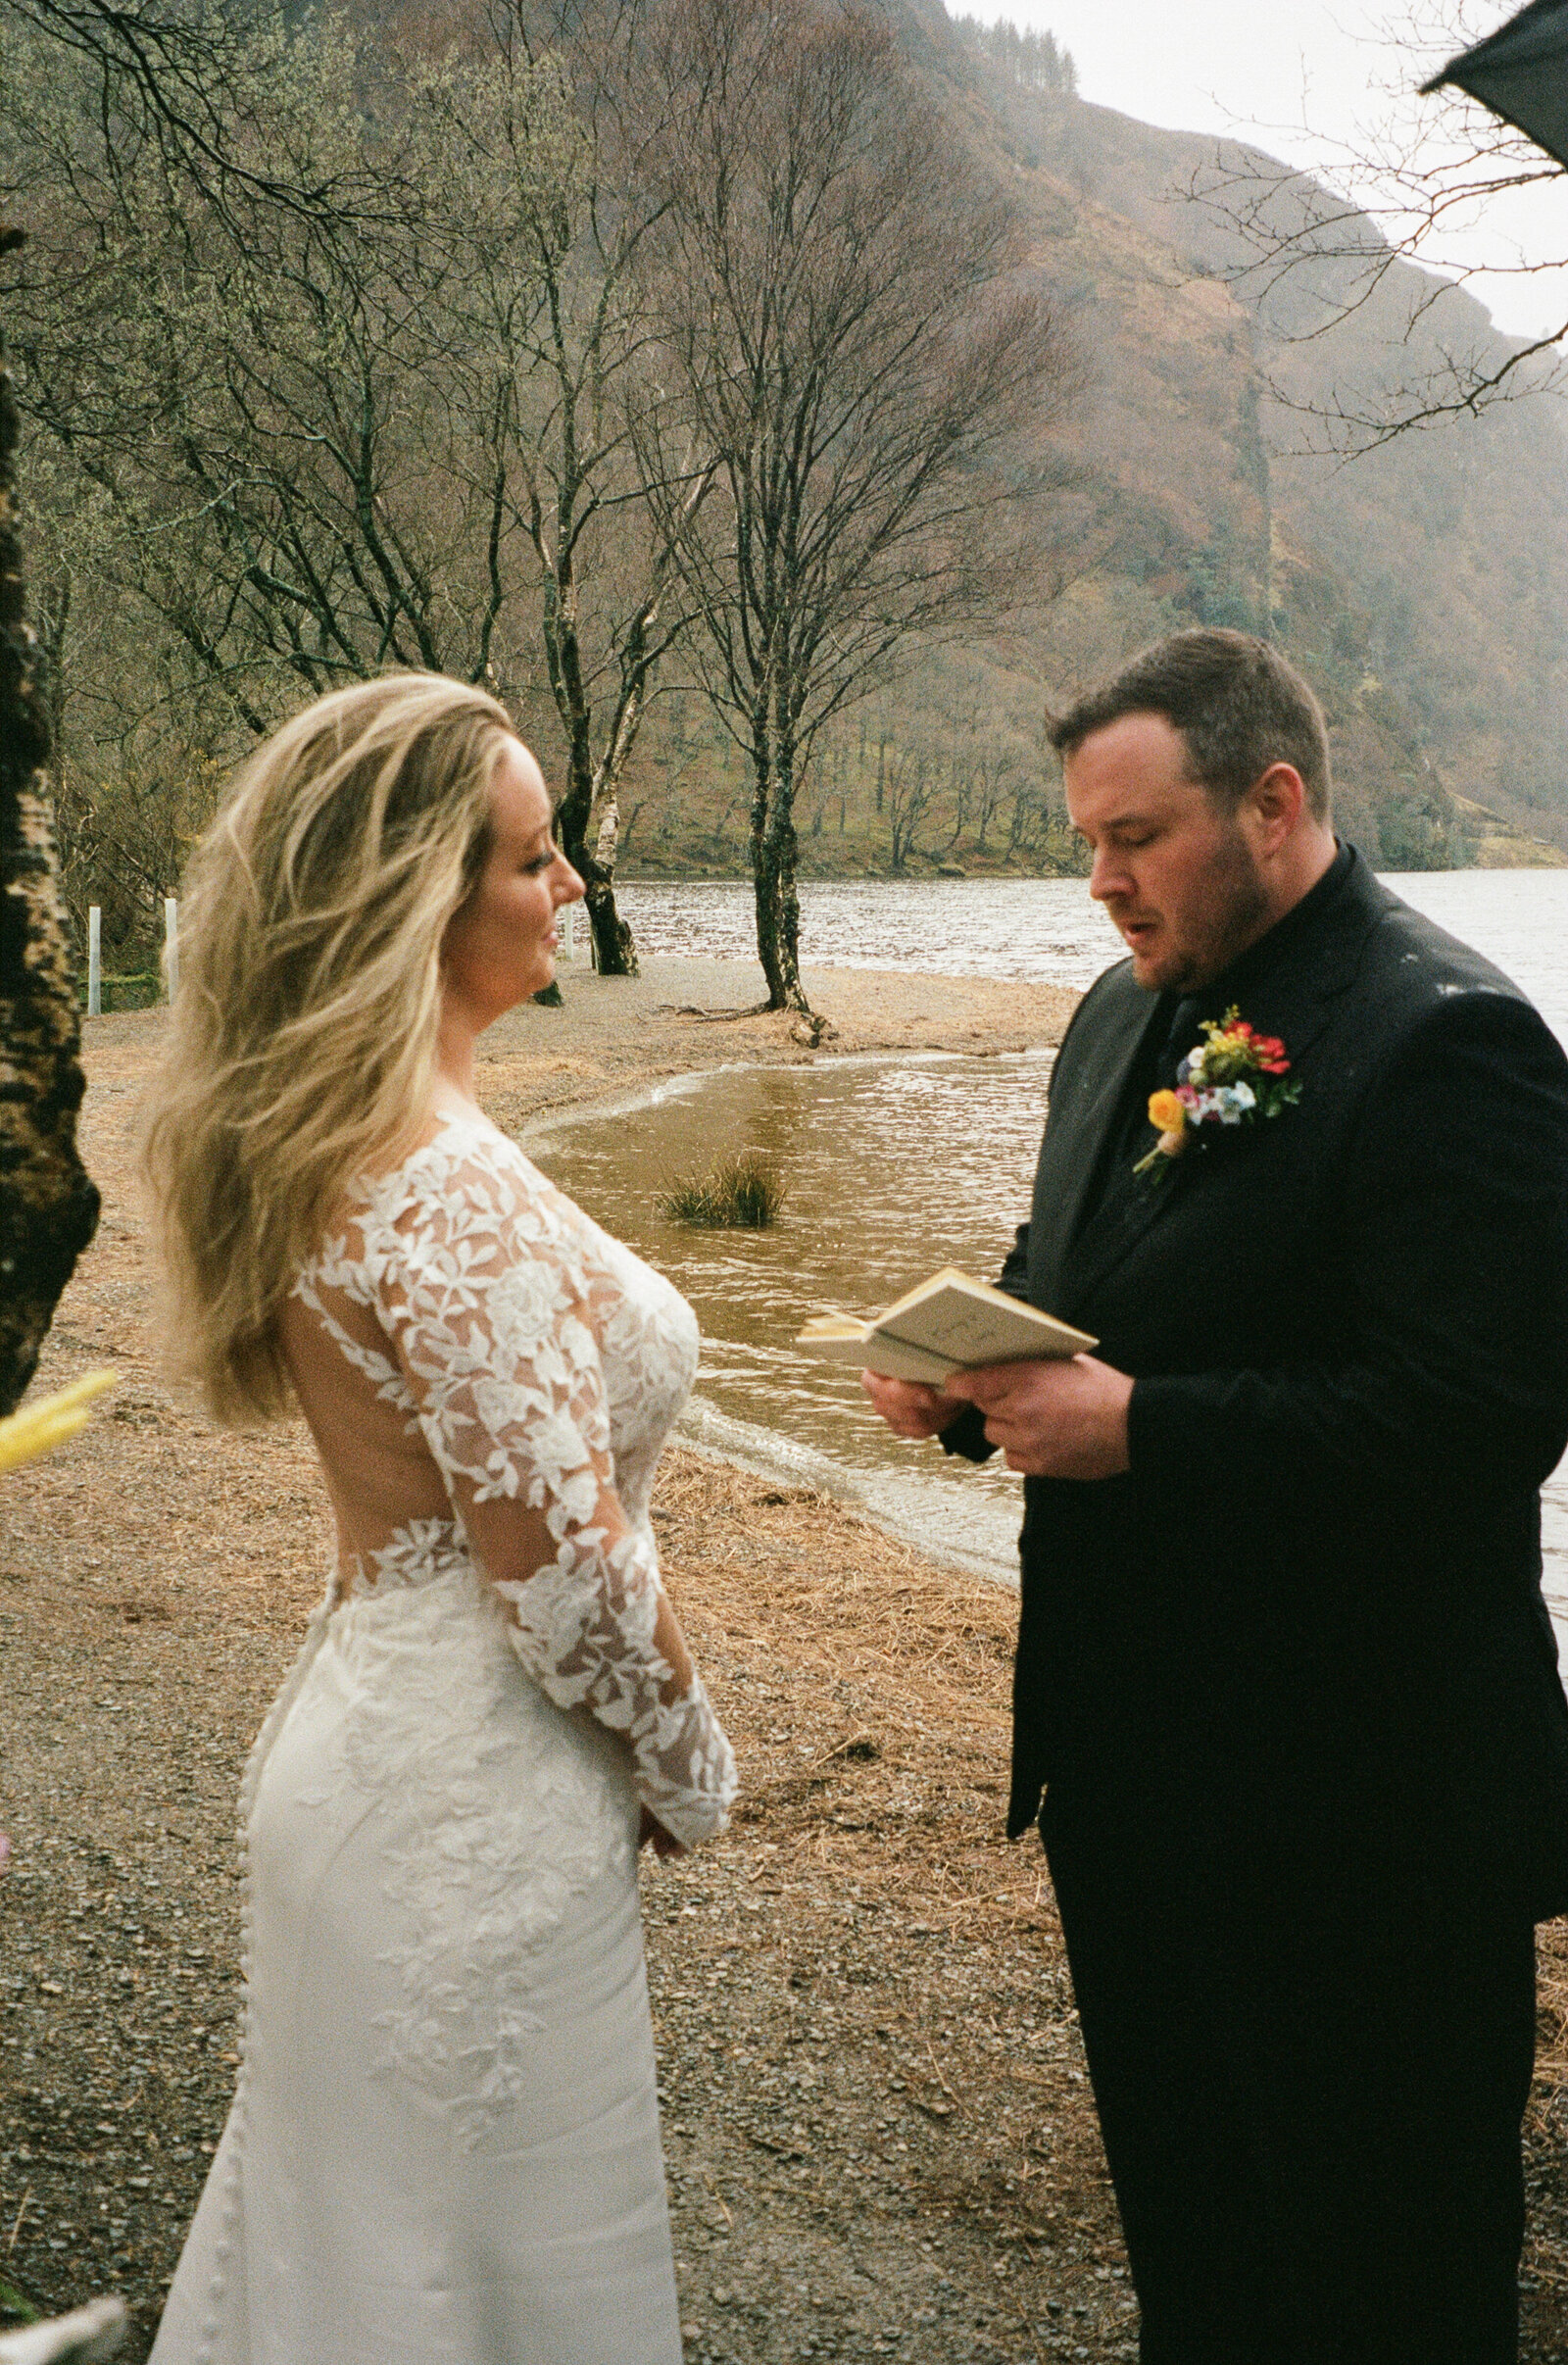 A bride in a lace wedding gown stands beside a man reading from a book in a scenic outdoor setting with a lake and mountains in the background